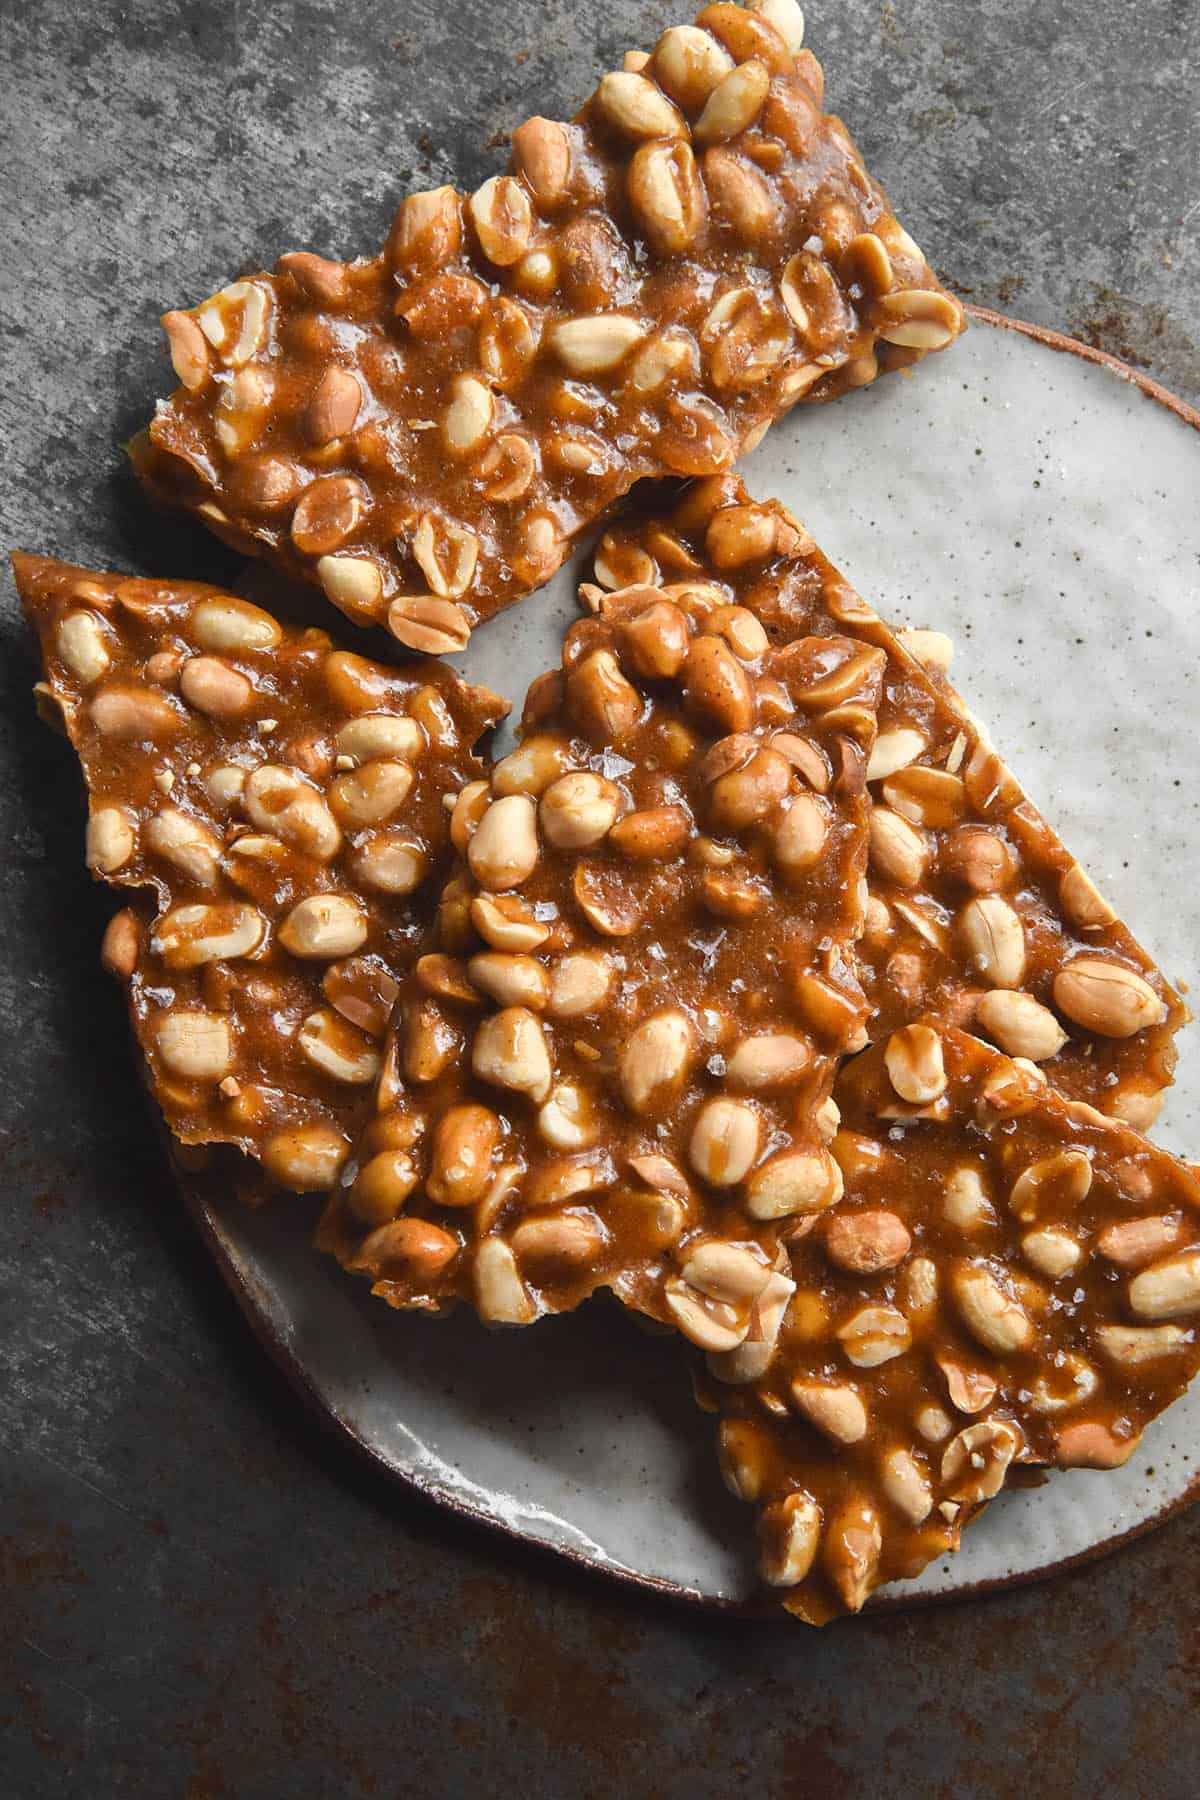 An aerial view of variously sized slabs of peanut brittle without corn syrup on a small white ceramic plate on a dark steel backdrop. The brittle is golden brown, casually arranged and sprinkled with flaky sea salt